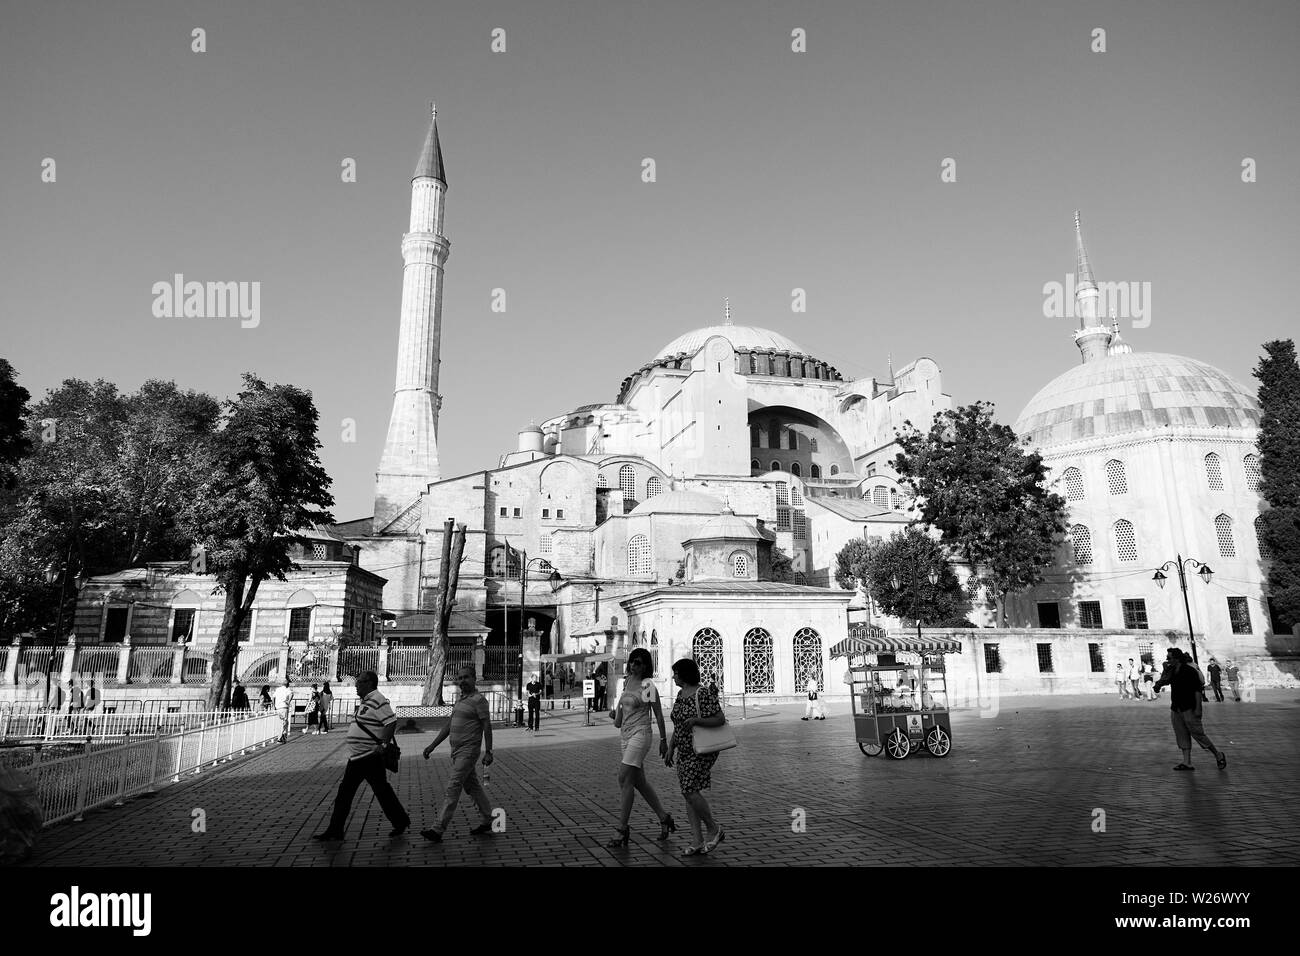 Istanbul, Turkey- September 17, 2017: External view of Hagia Sophia, a monument first born as a church, then a mosque, and now a museum visited by mil Stock Photo